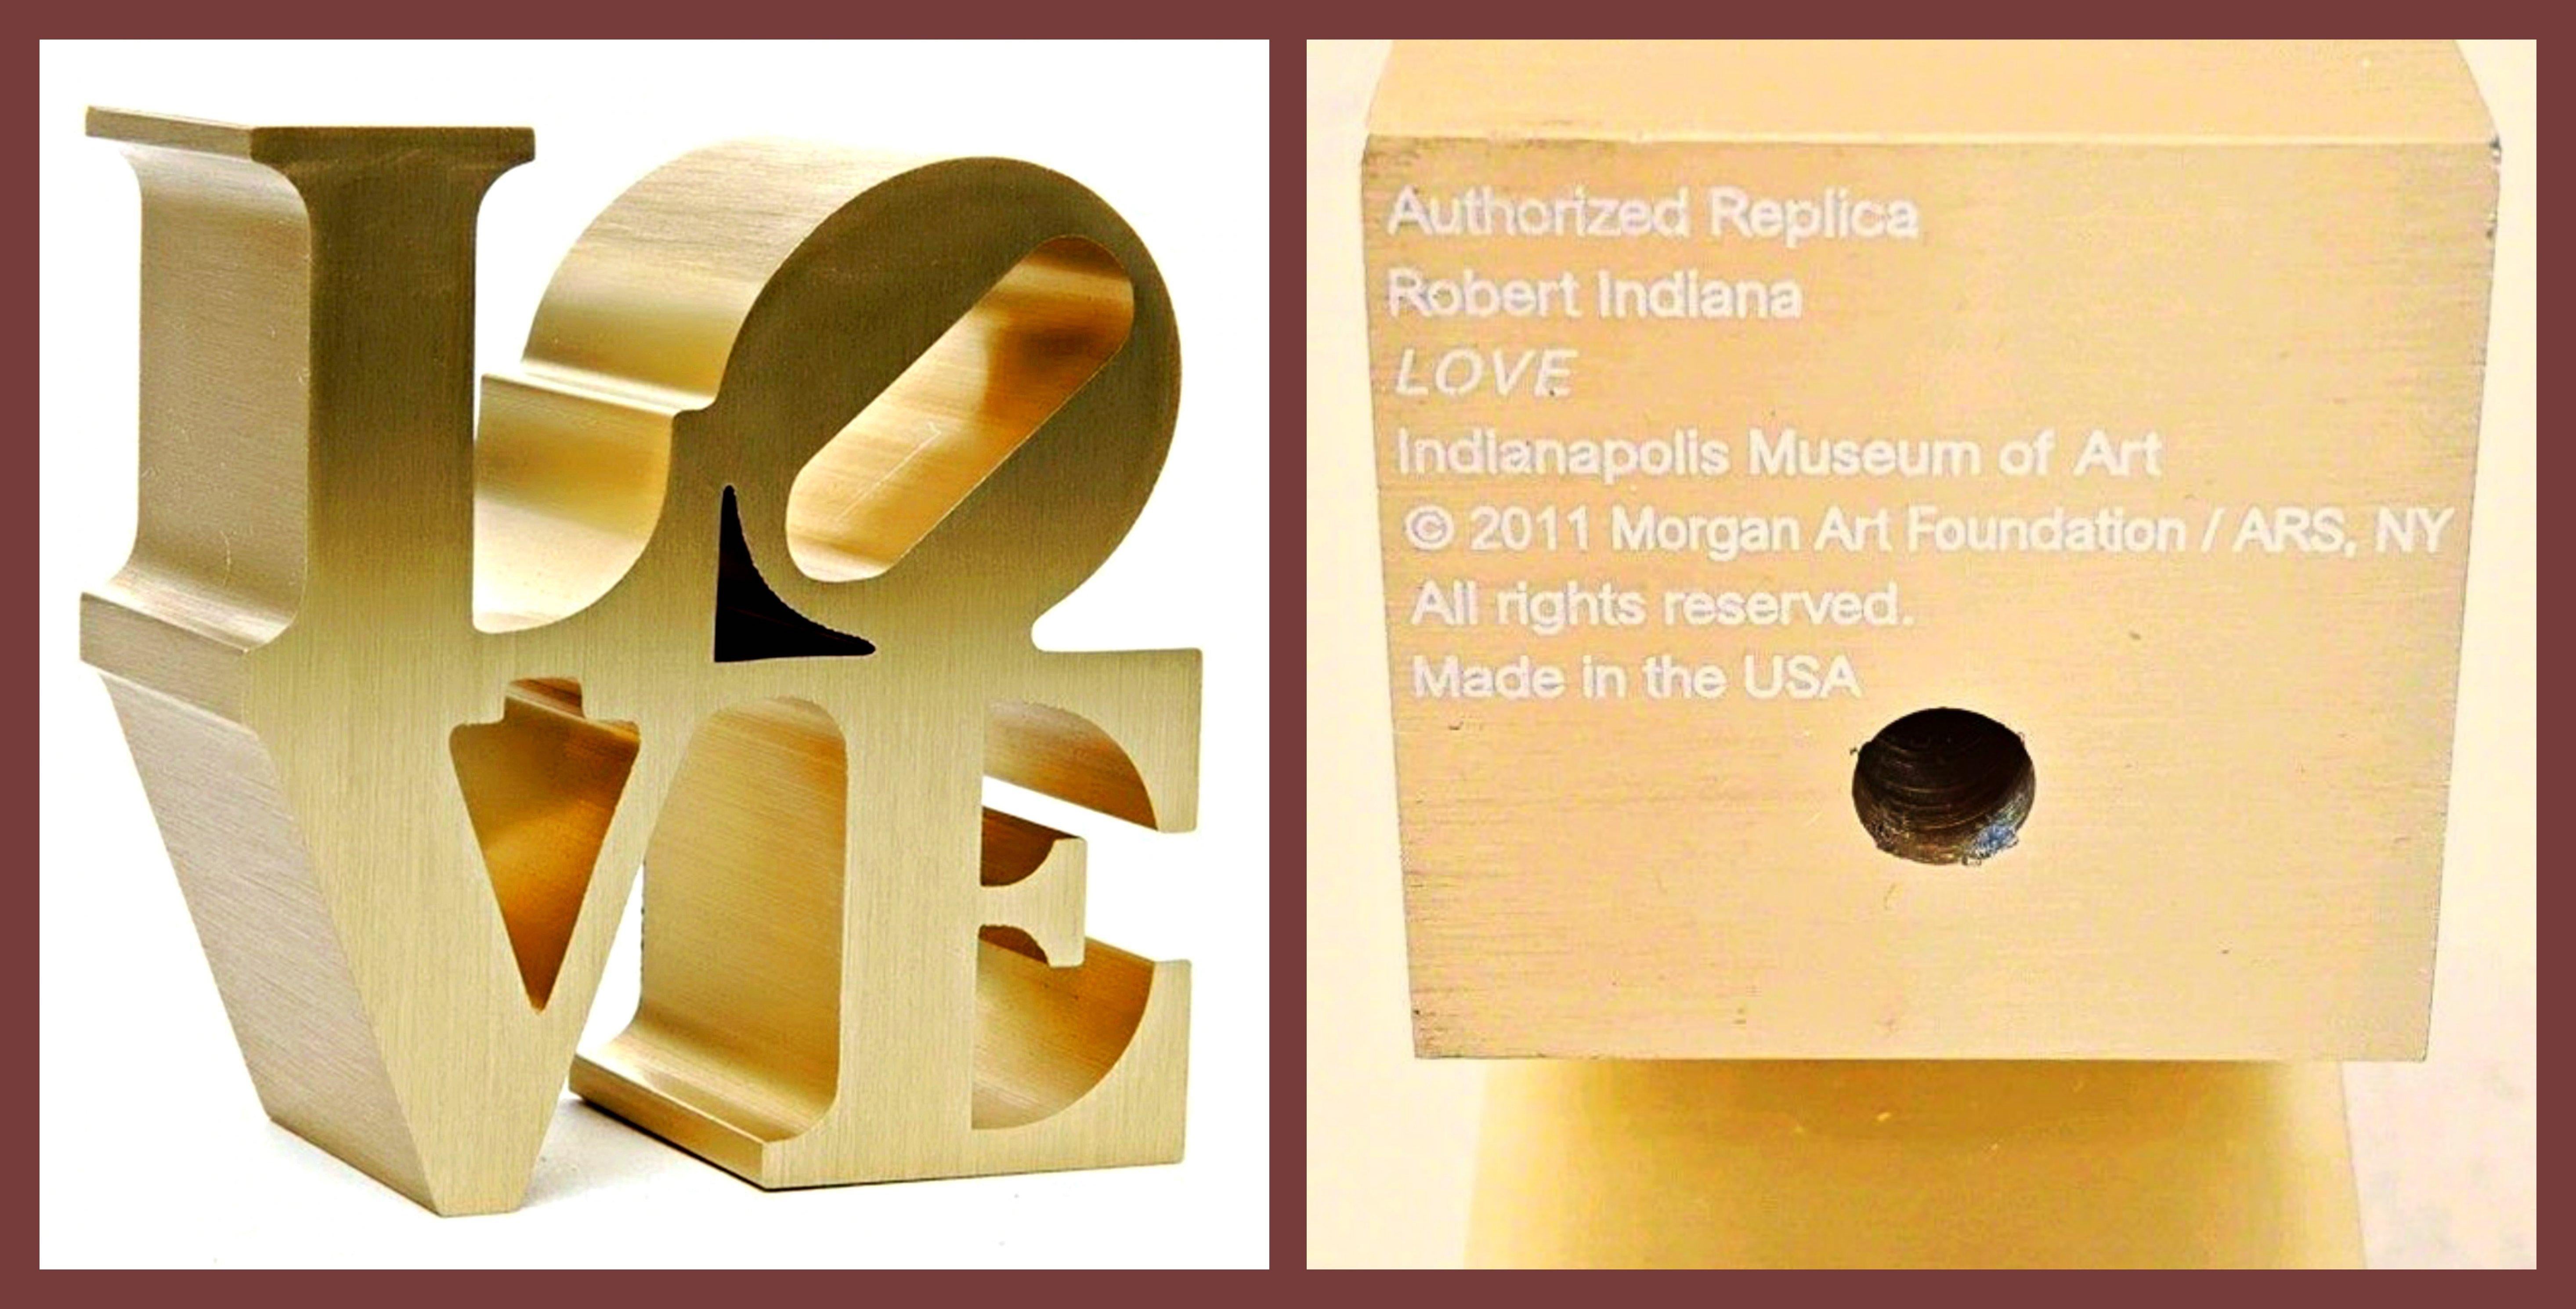 Robert Indiana Abstract Sculpture - LOVE (Authorized replica, official stamp of Indianapolis Museum of Art & artist)